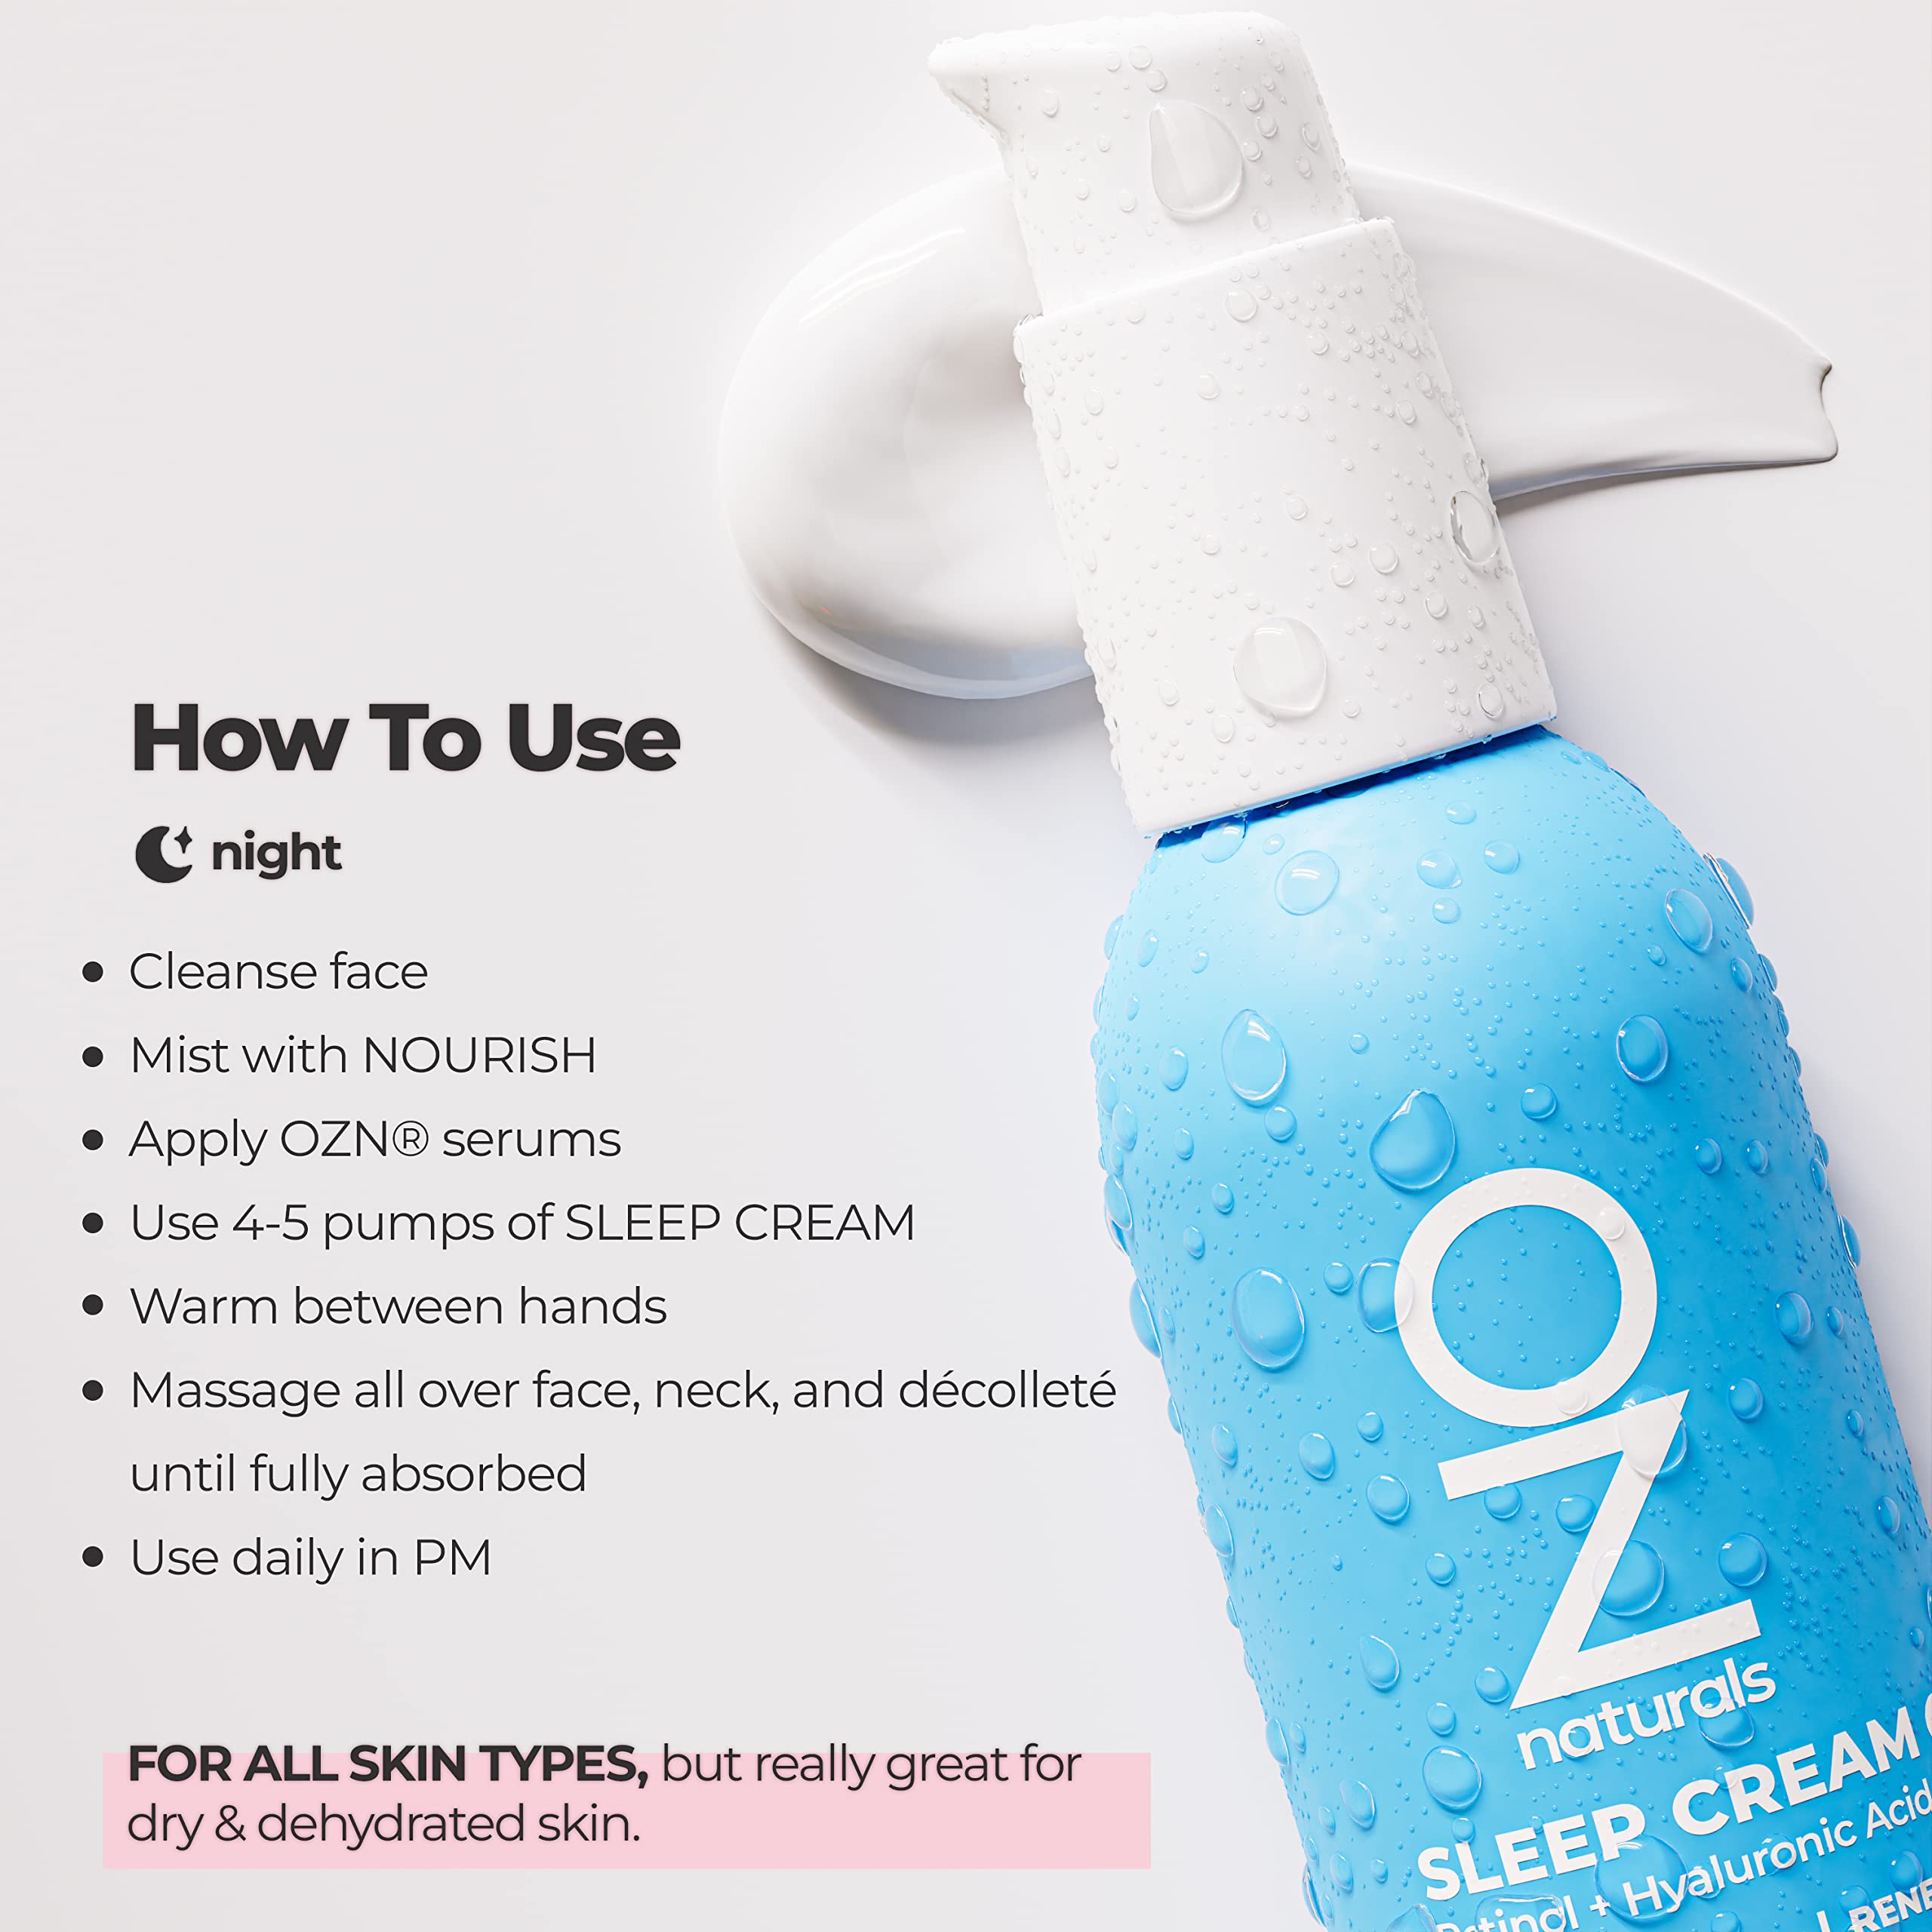 OZNaturals SLEEP CREAM: Retinol Moisturizer + Hyaluronic Acid + Nourishing Shea Butter Works to Deeply Moisurize and Reduce Fine Lines and Sun Spots - Nightly Skin Care Routine / (3 oz)